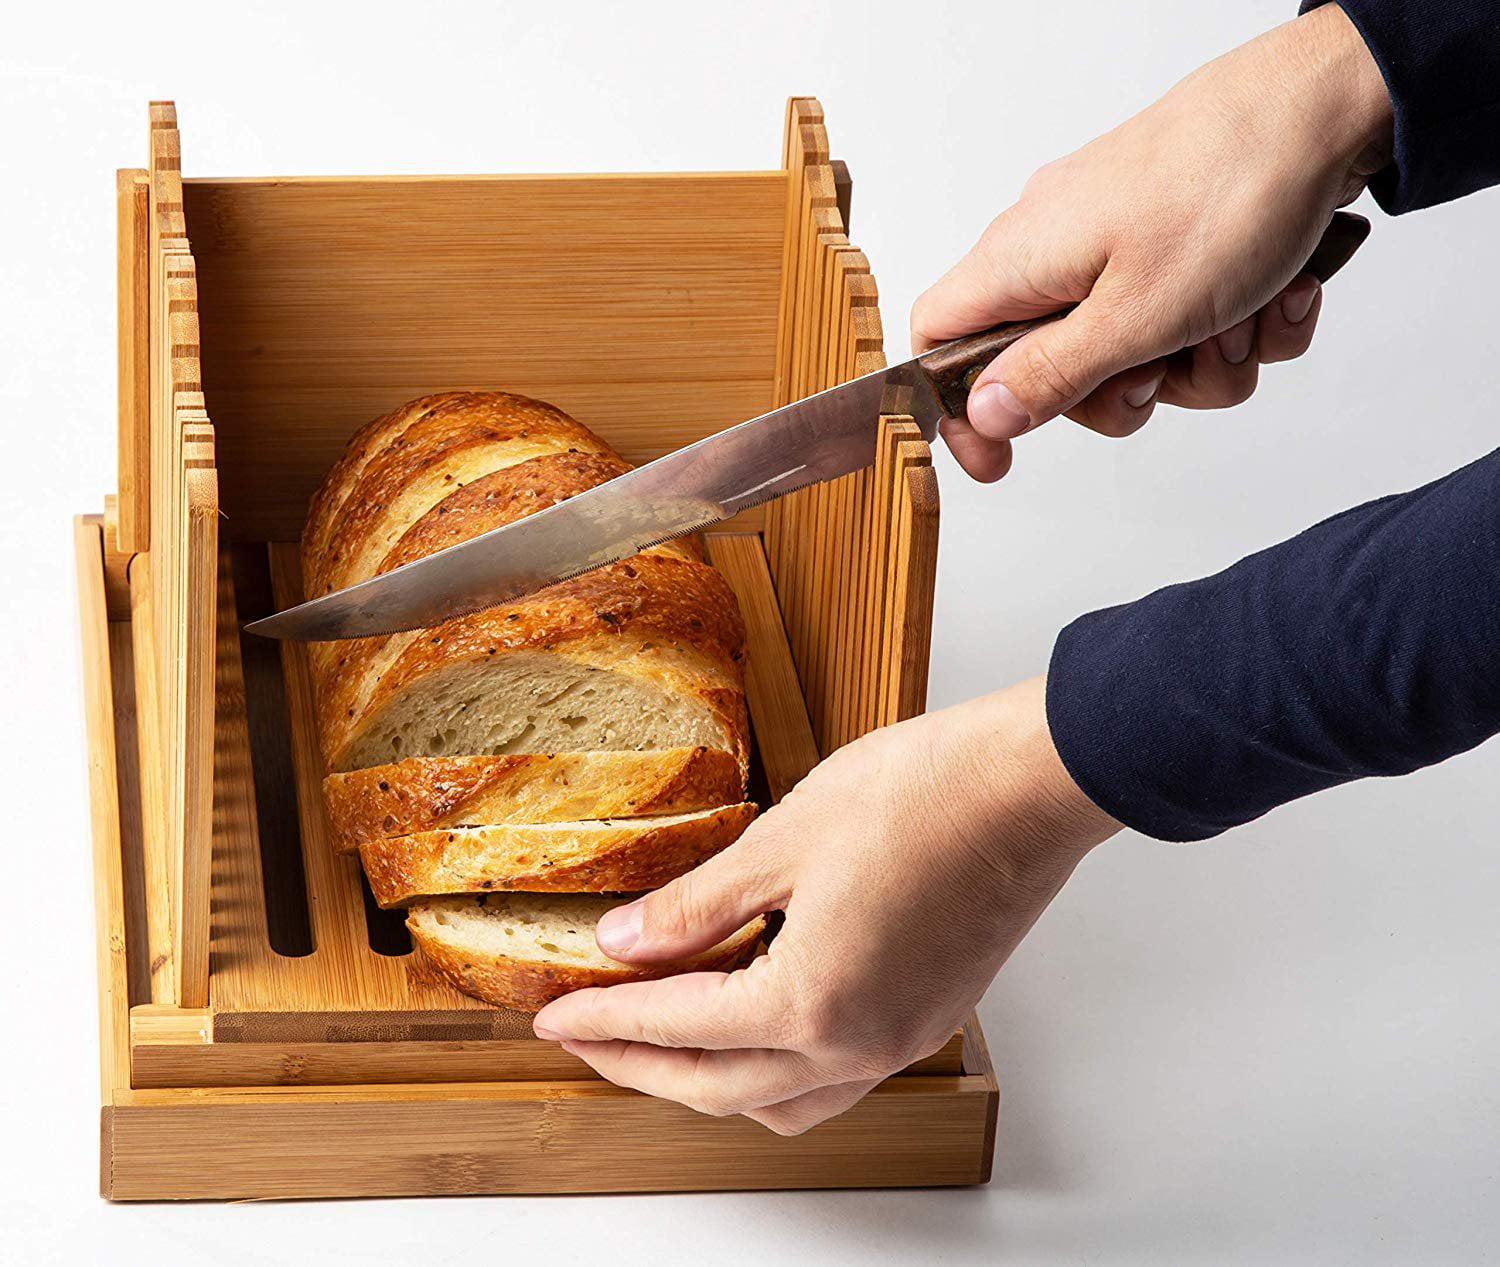 Foldable Bread Slicer Guide for Homemade Bread Machine Plastic Cutting Board for Bread/Cake/Loaf 